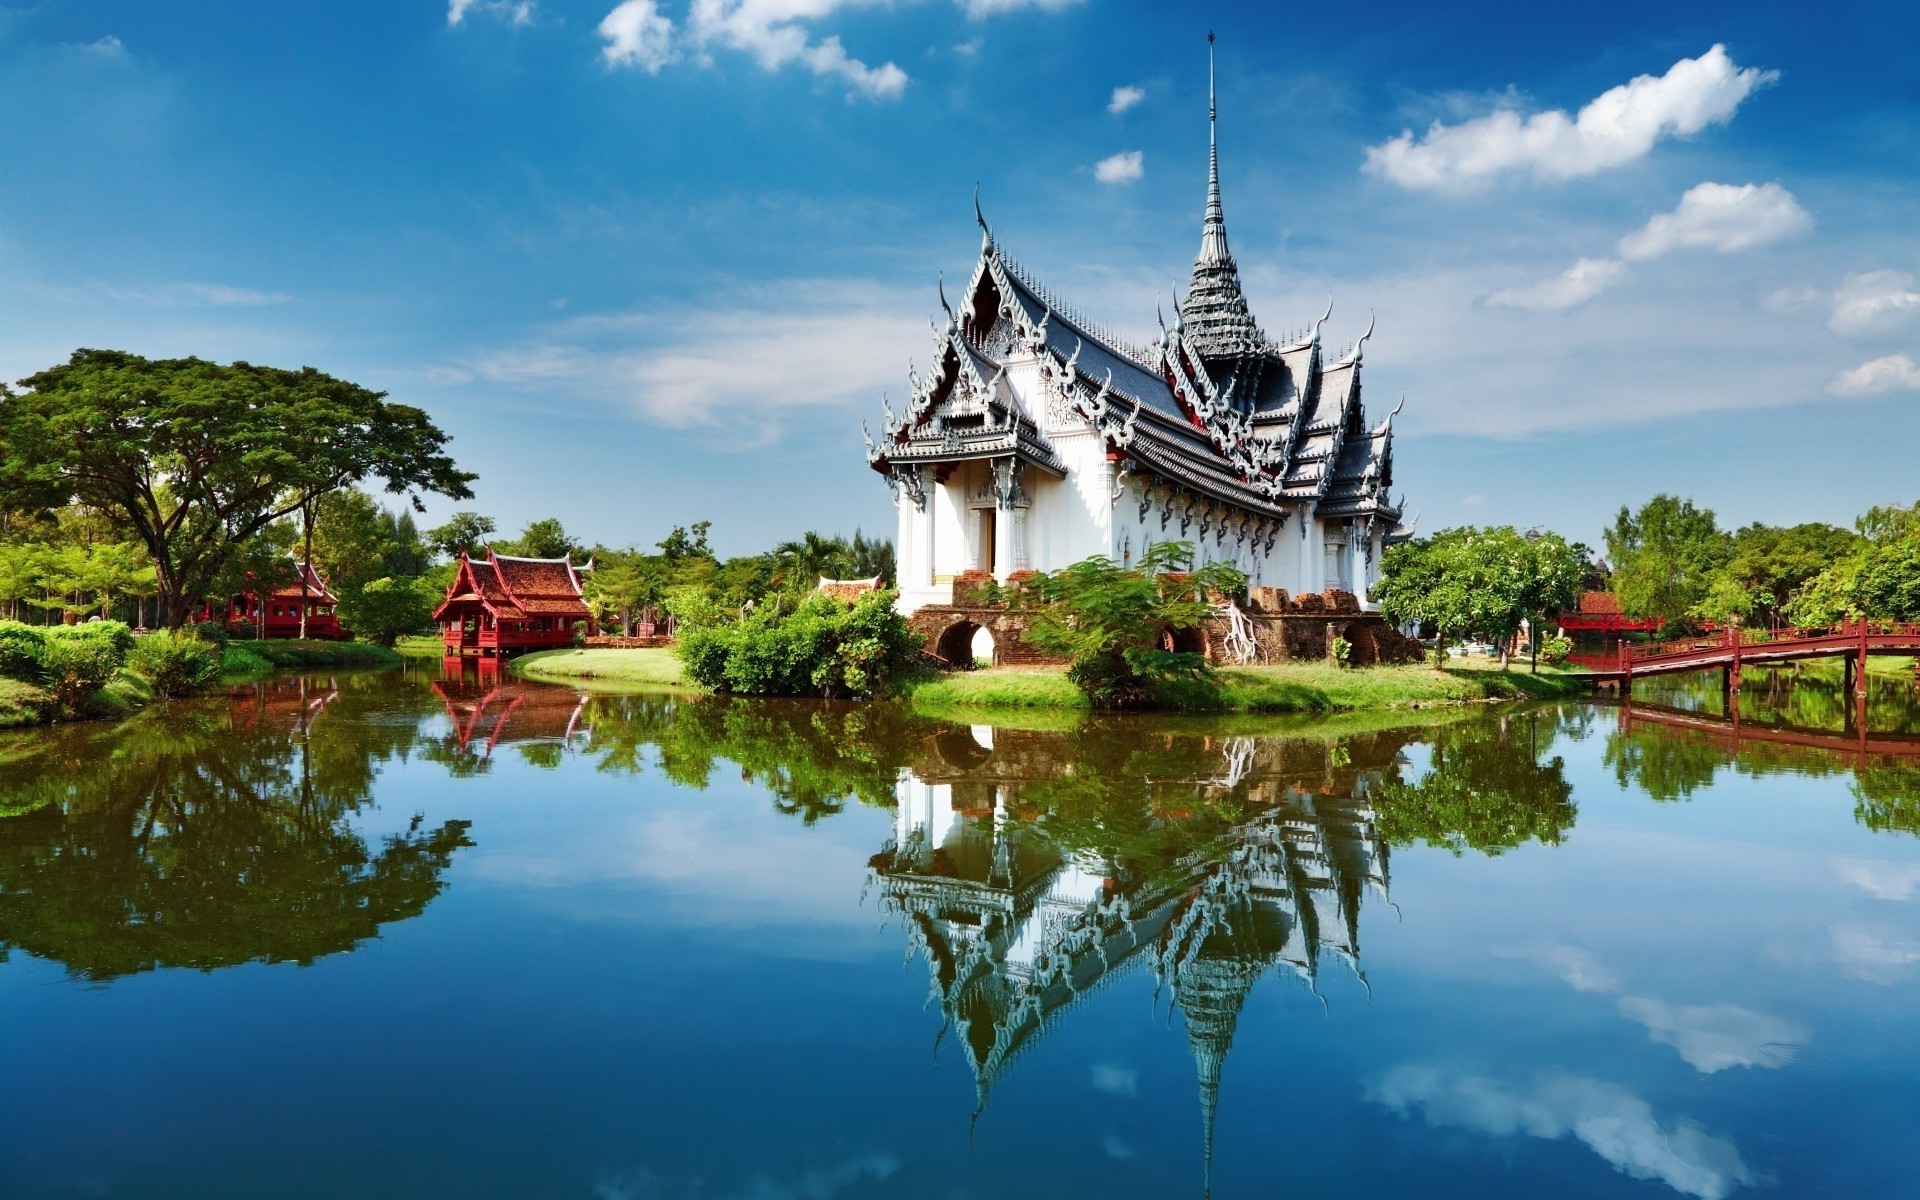 lake travel water sky reflection traditional architecture tree temple culture outdoors tourism cloud pool building pagoda river summer park